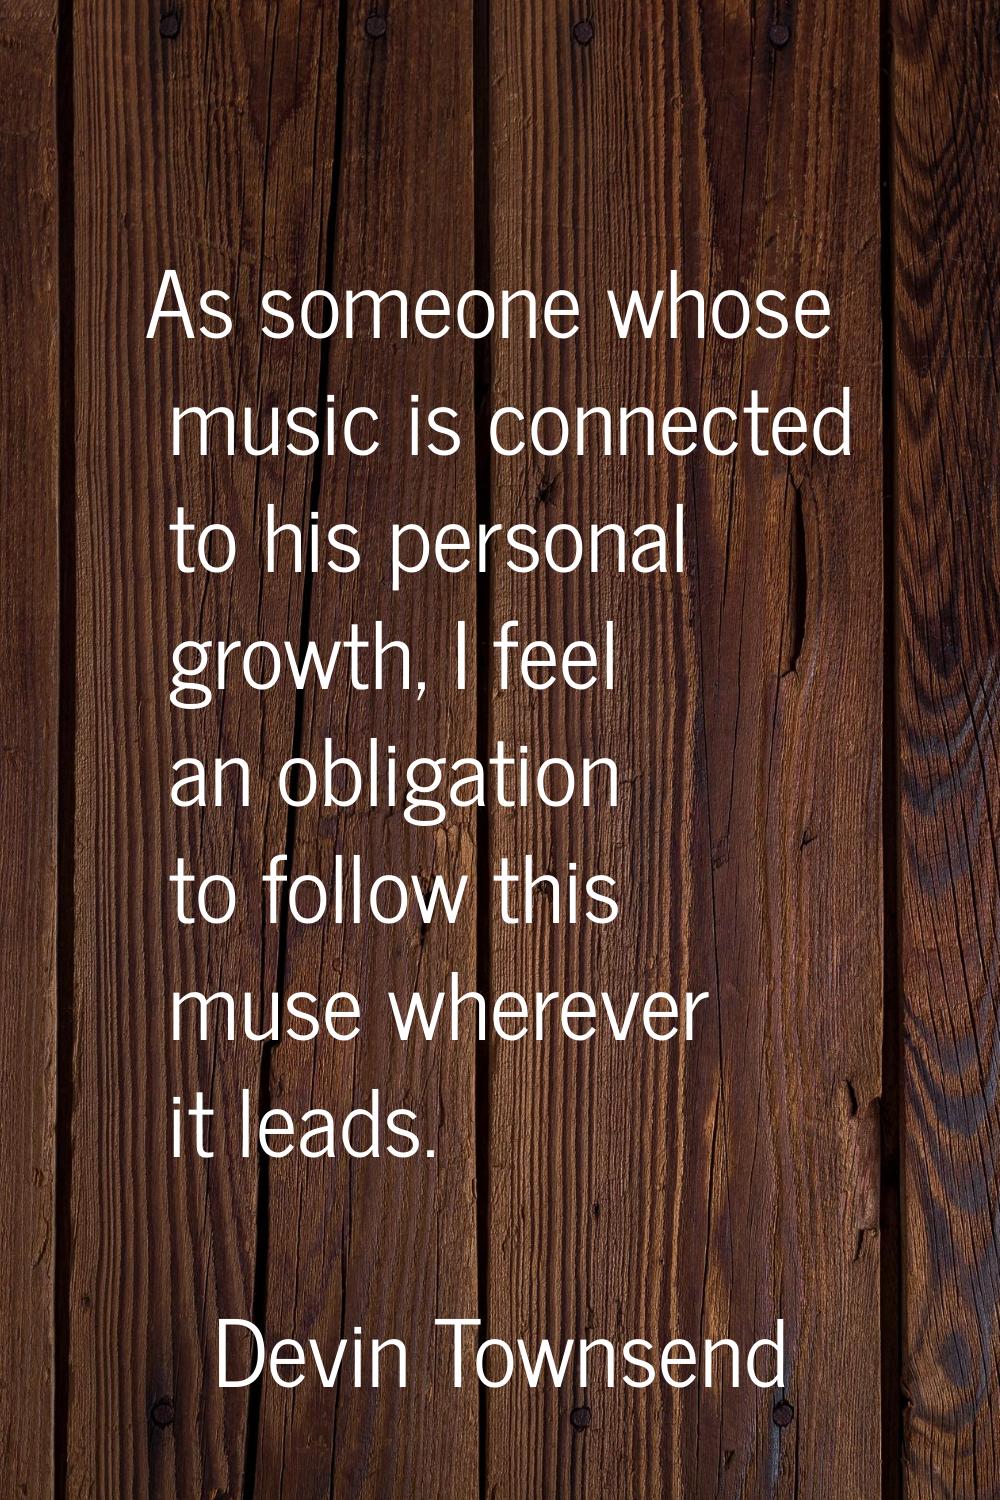 As someone whose music is connected to his personal growth, I feel an obligation to follow this mus